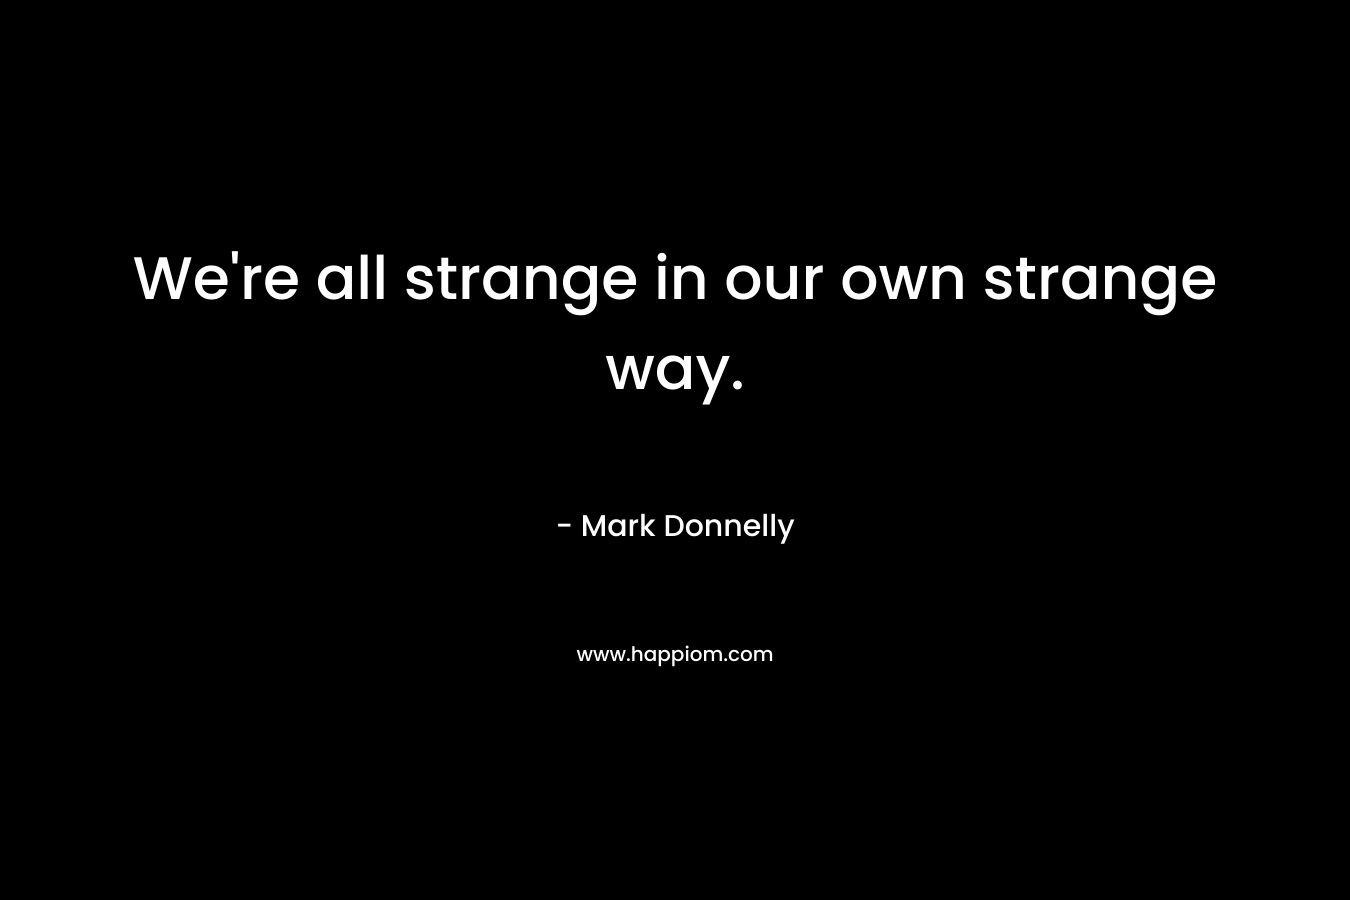 We're all strange in our own strange way.